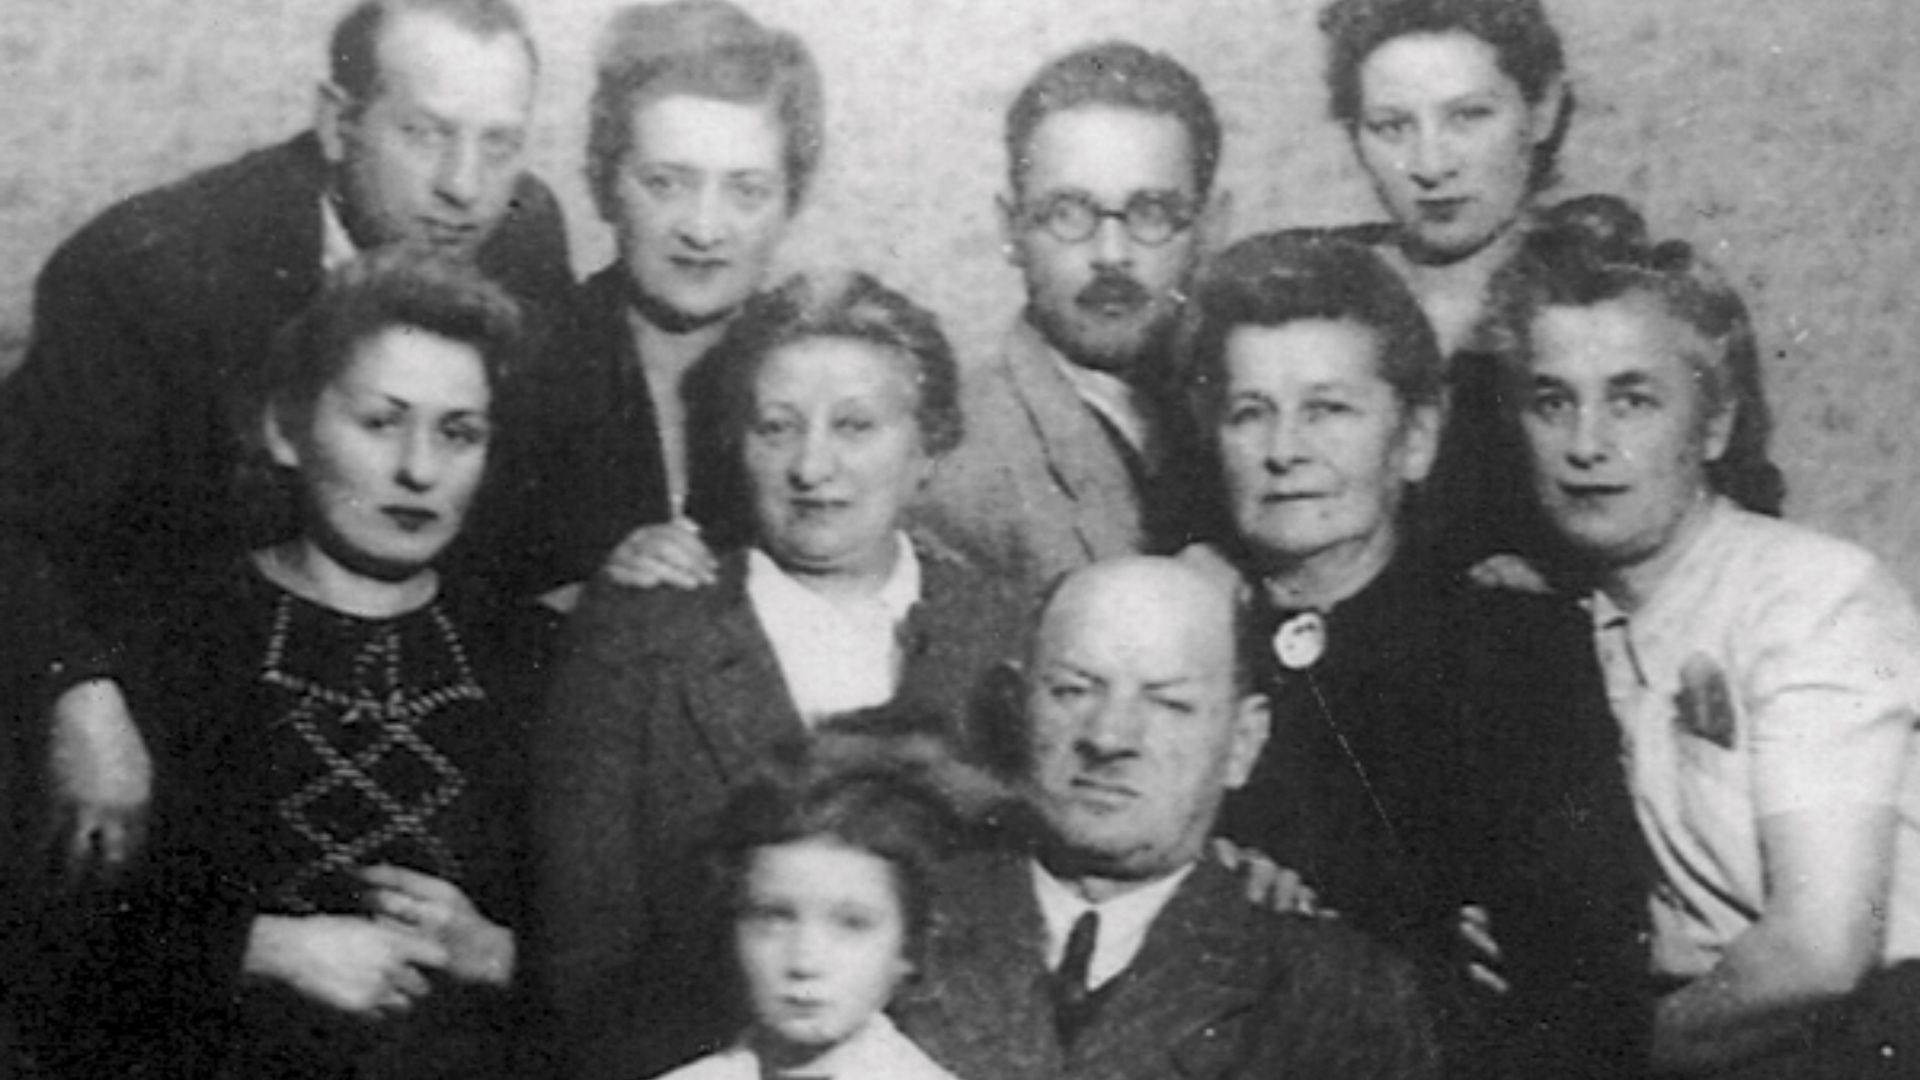 A Kurc family photo with members of the family looking toward the camera